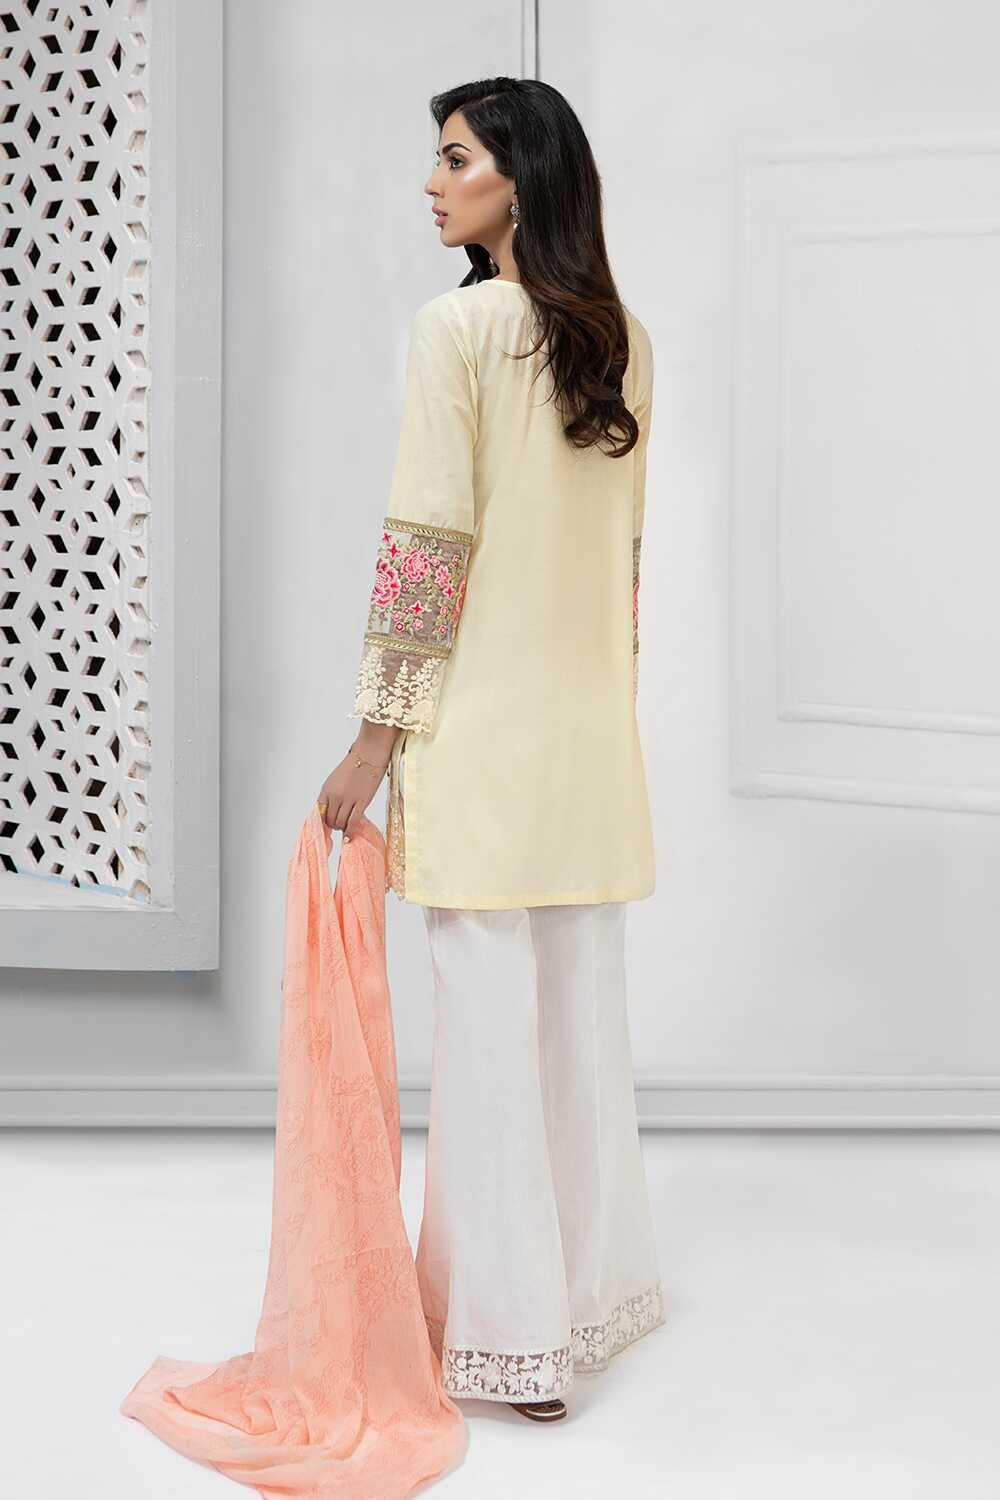 /2019/07/mariab-eid-collection-suit-light-yellow-dw-2218-image2.jpeg